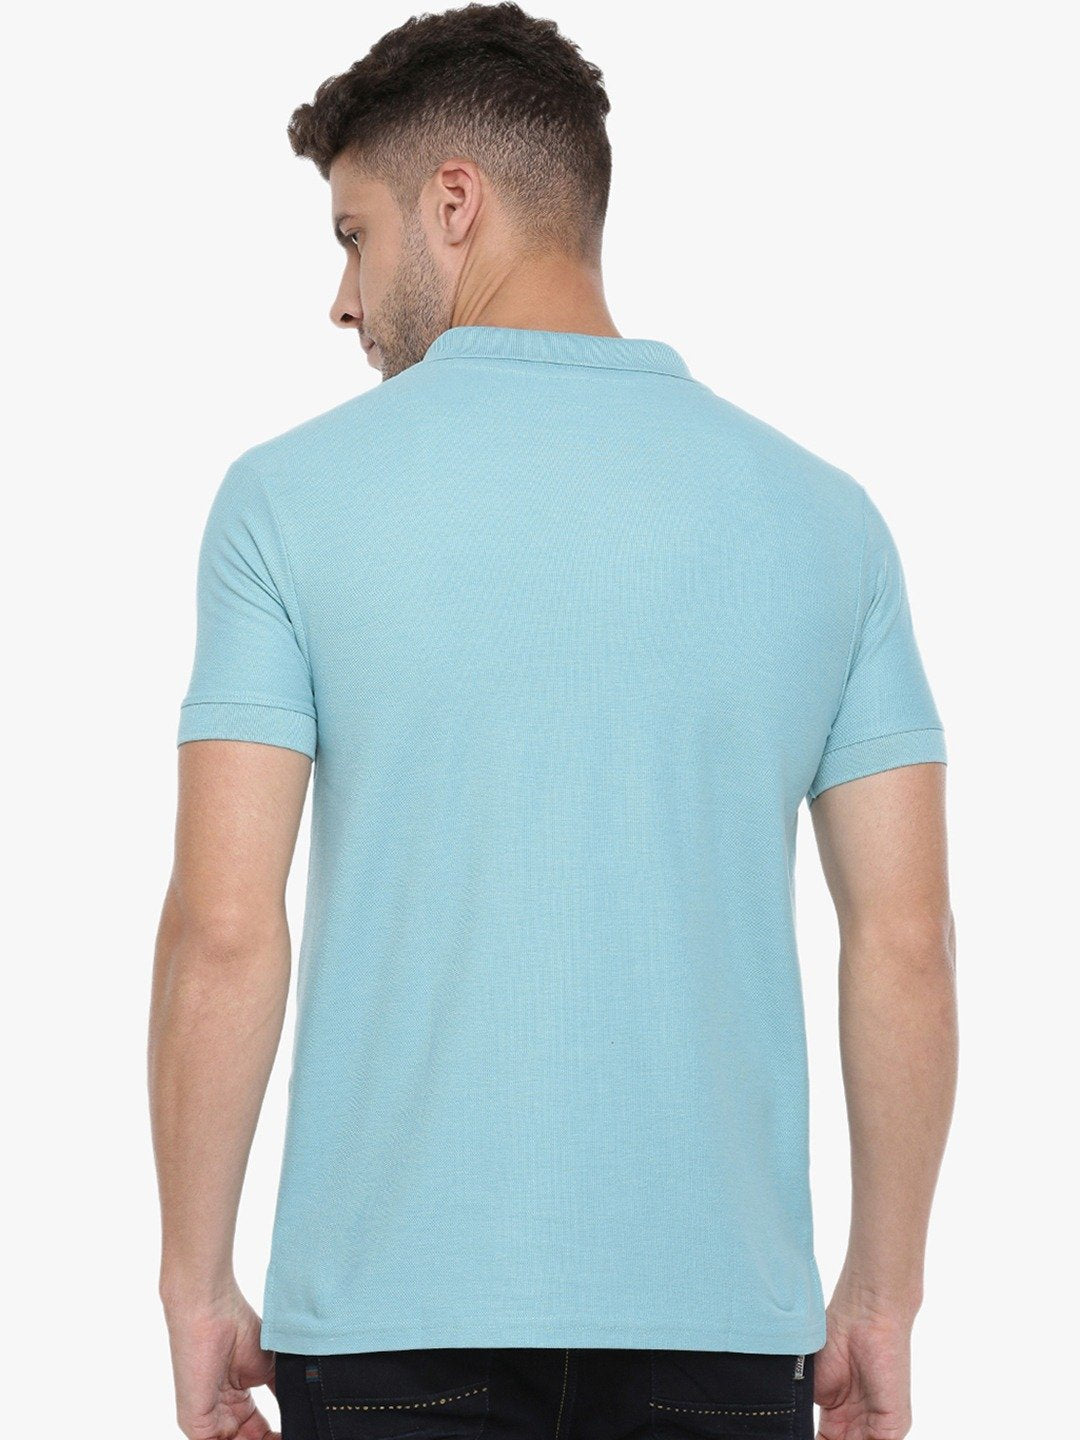 Blue Slim Fit Polo Neck T-Shirt with collar for Men - Stilento